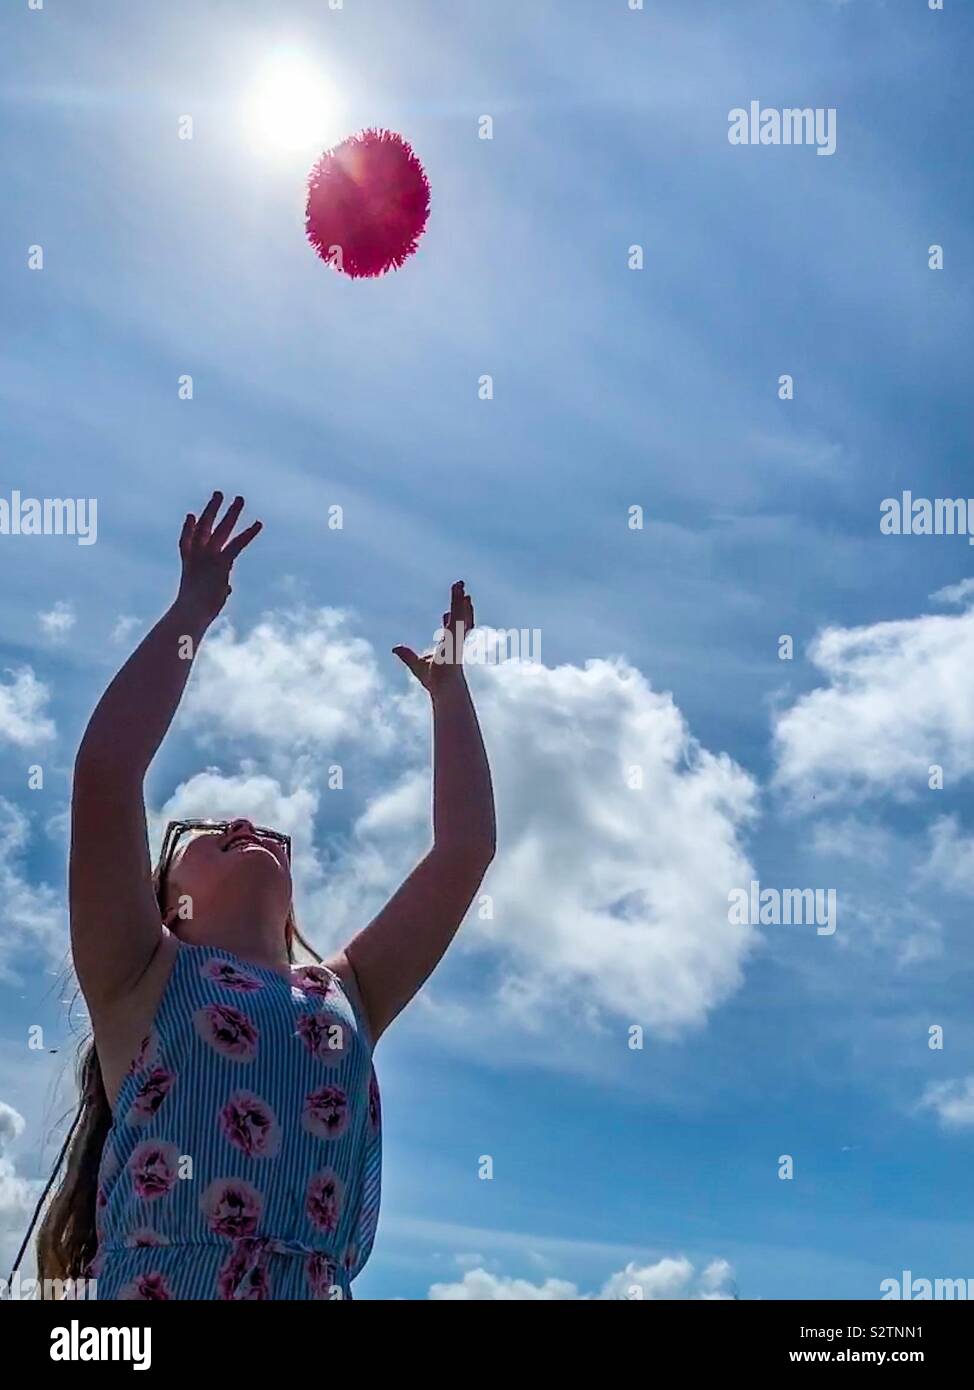 Young girl throwing a pink ball in sky Stock Photo